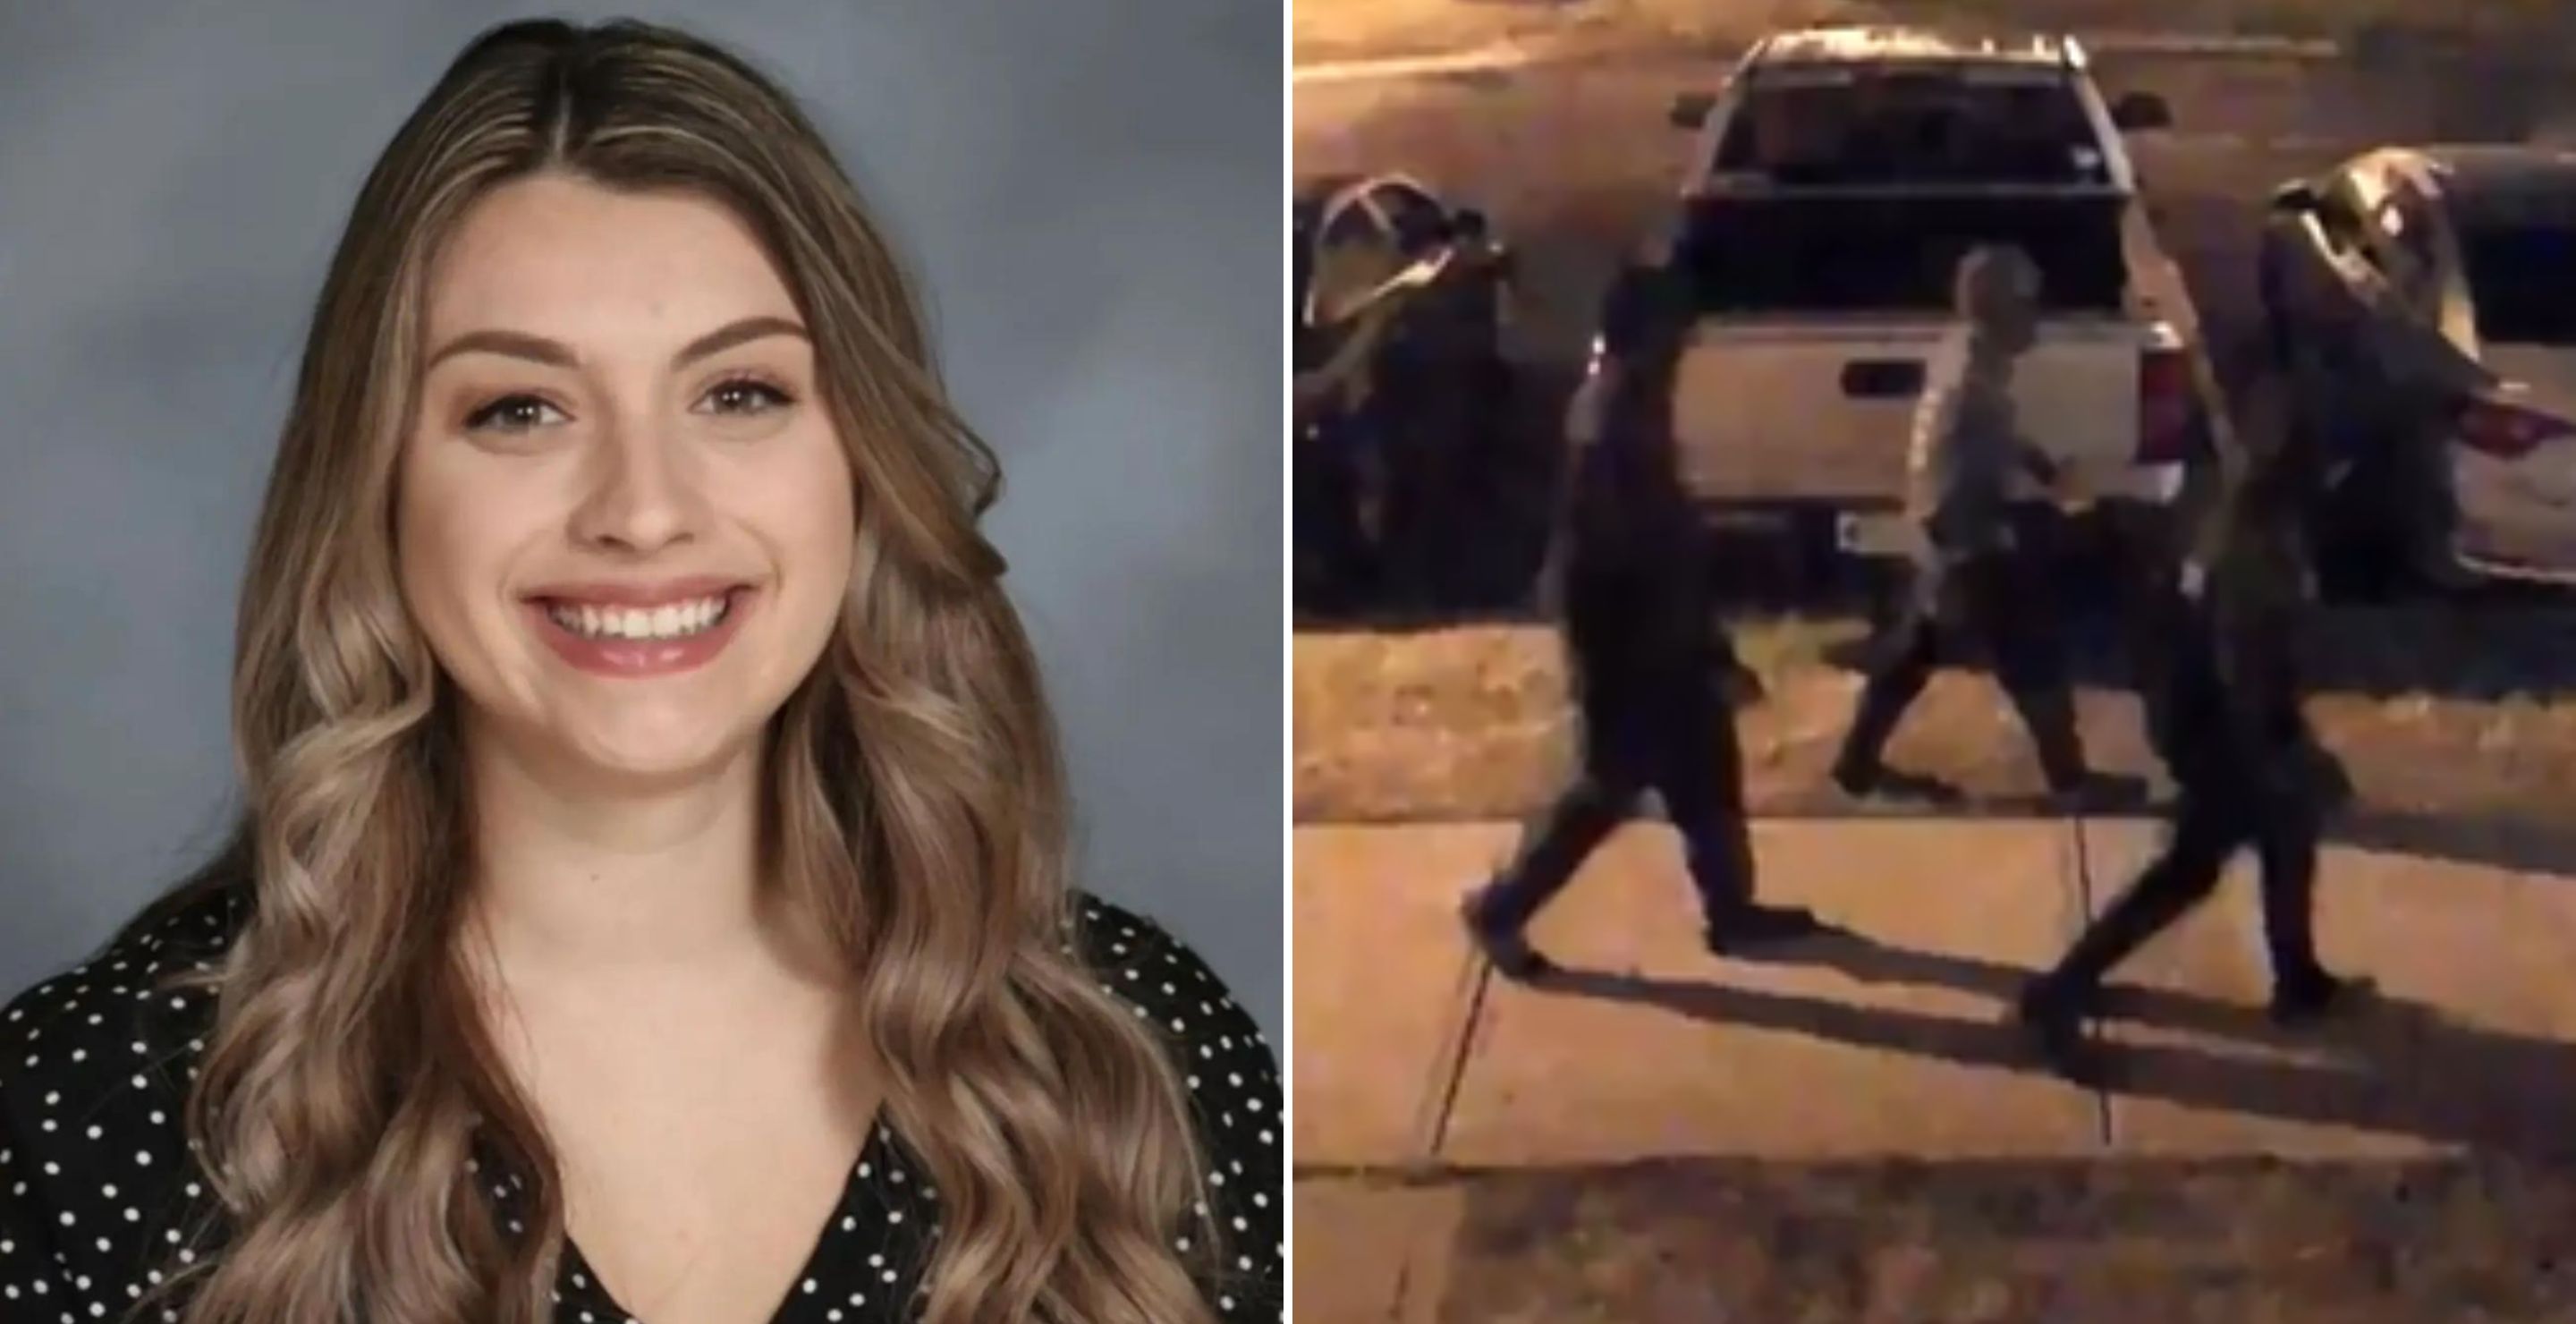 Teen Carjackers Charged With Murder Of Ohio Mother Hit By Own SUV